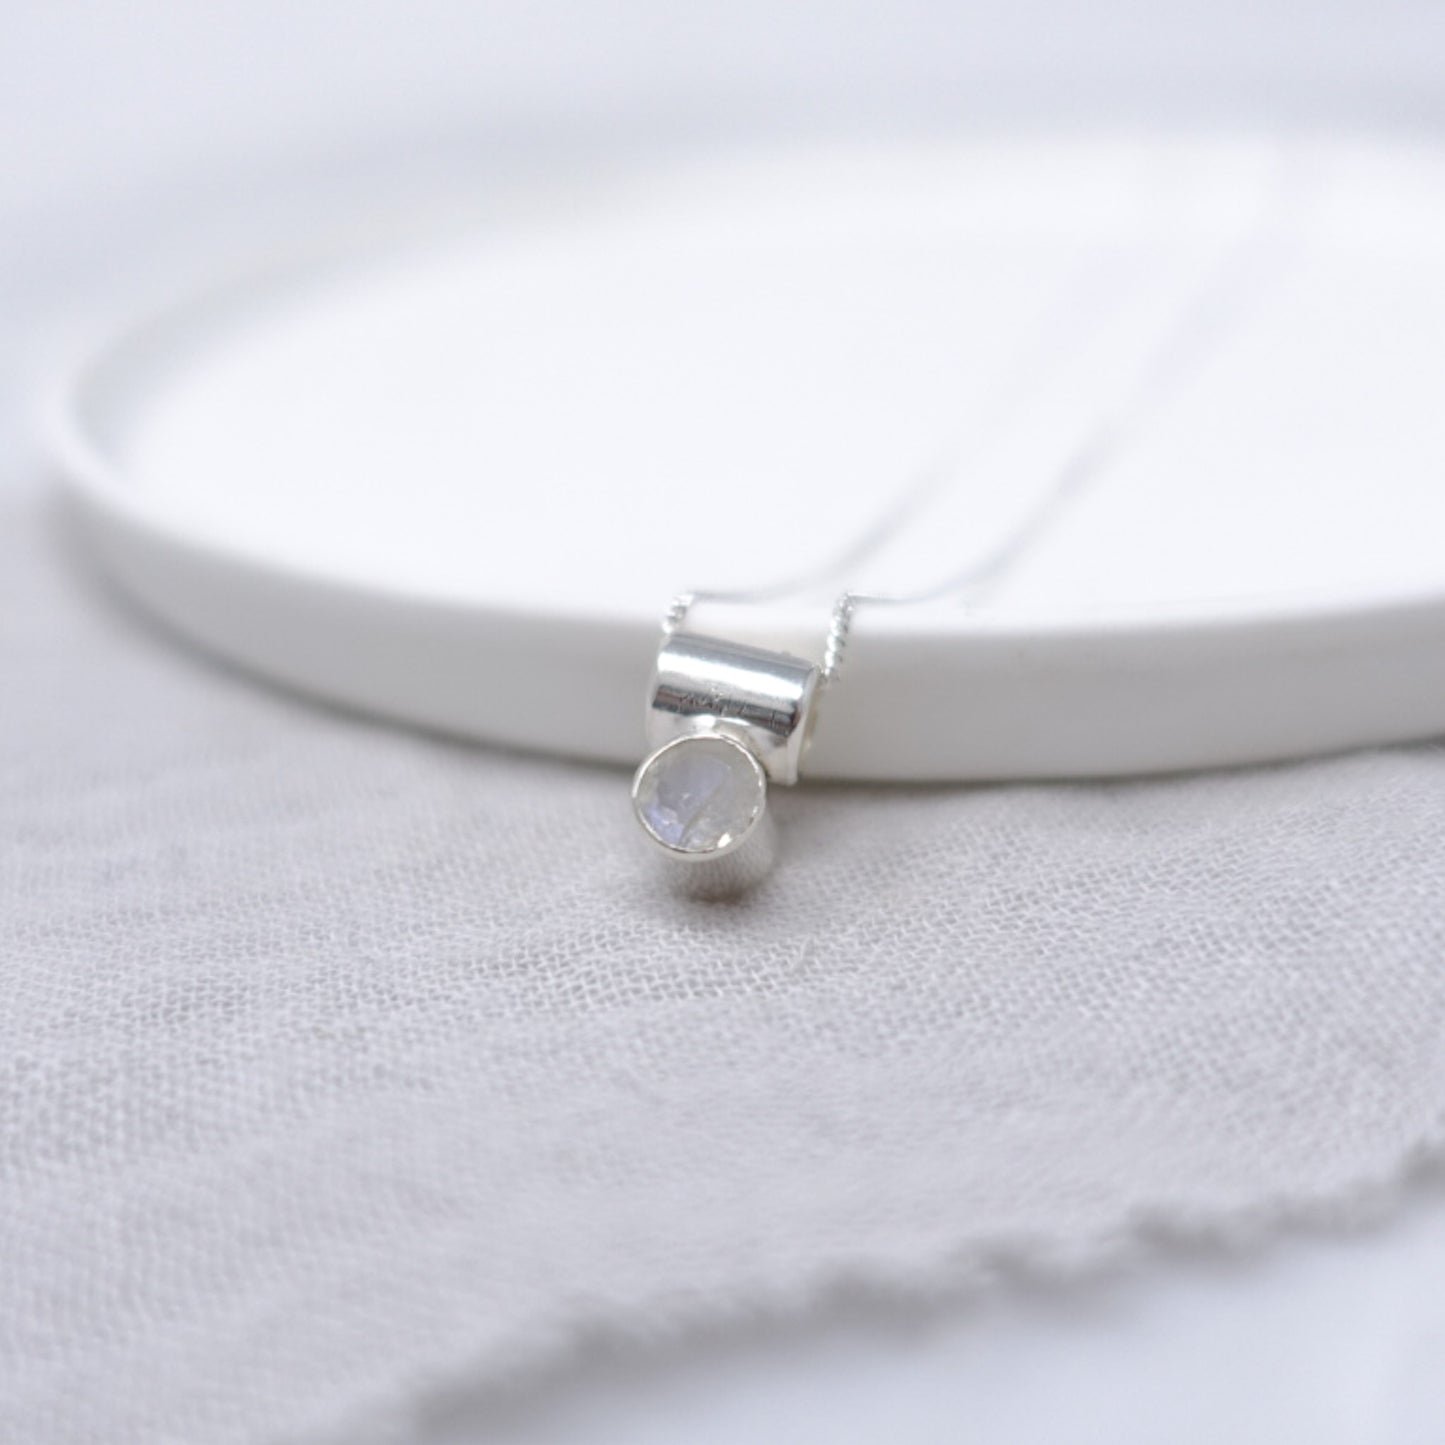 'Friendship/Connection' Moonstone Necklace